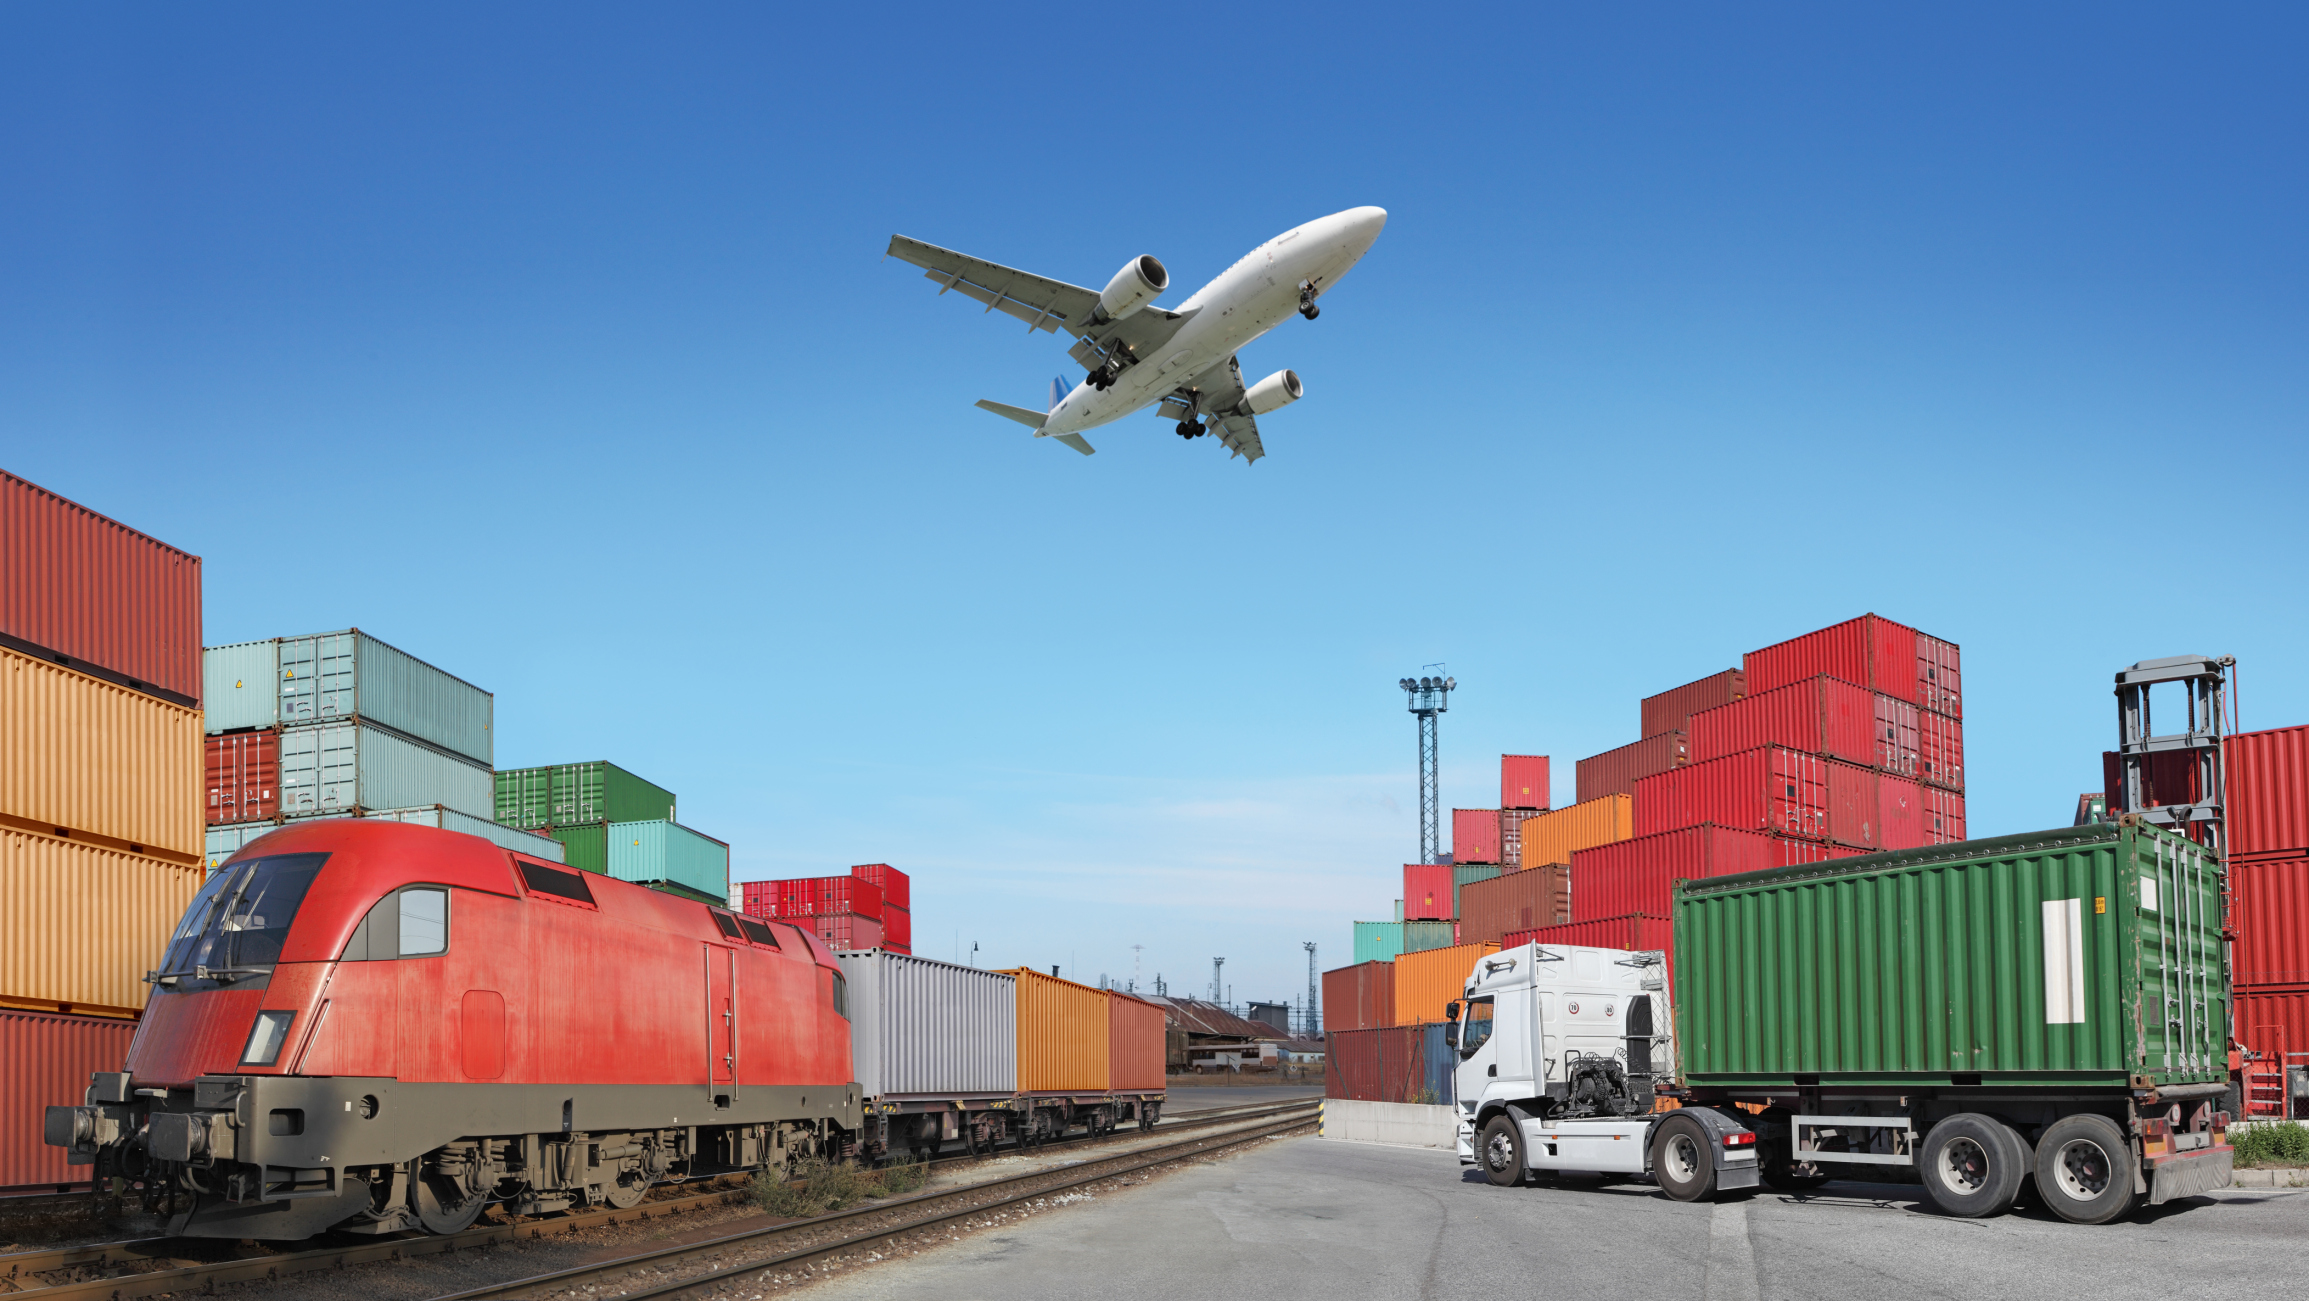 containers, Airplane, Sky, Colorful, Truck, Vehicle, Railway, Train, Diesel locomotive, Clear sky, Industrial Wallpaper